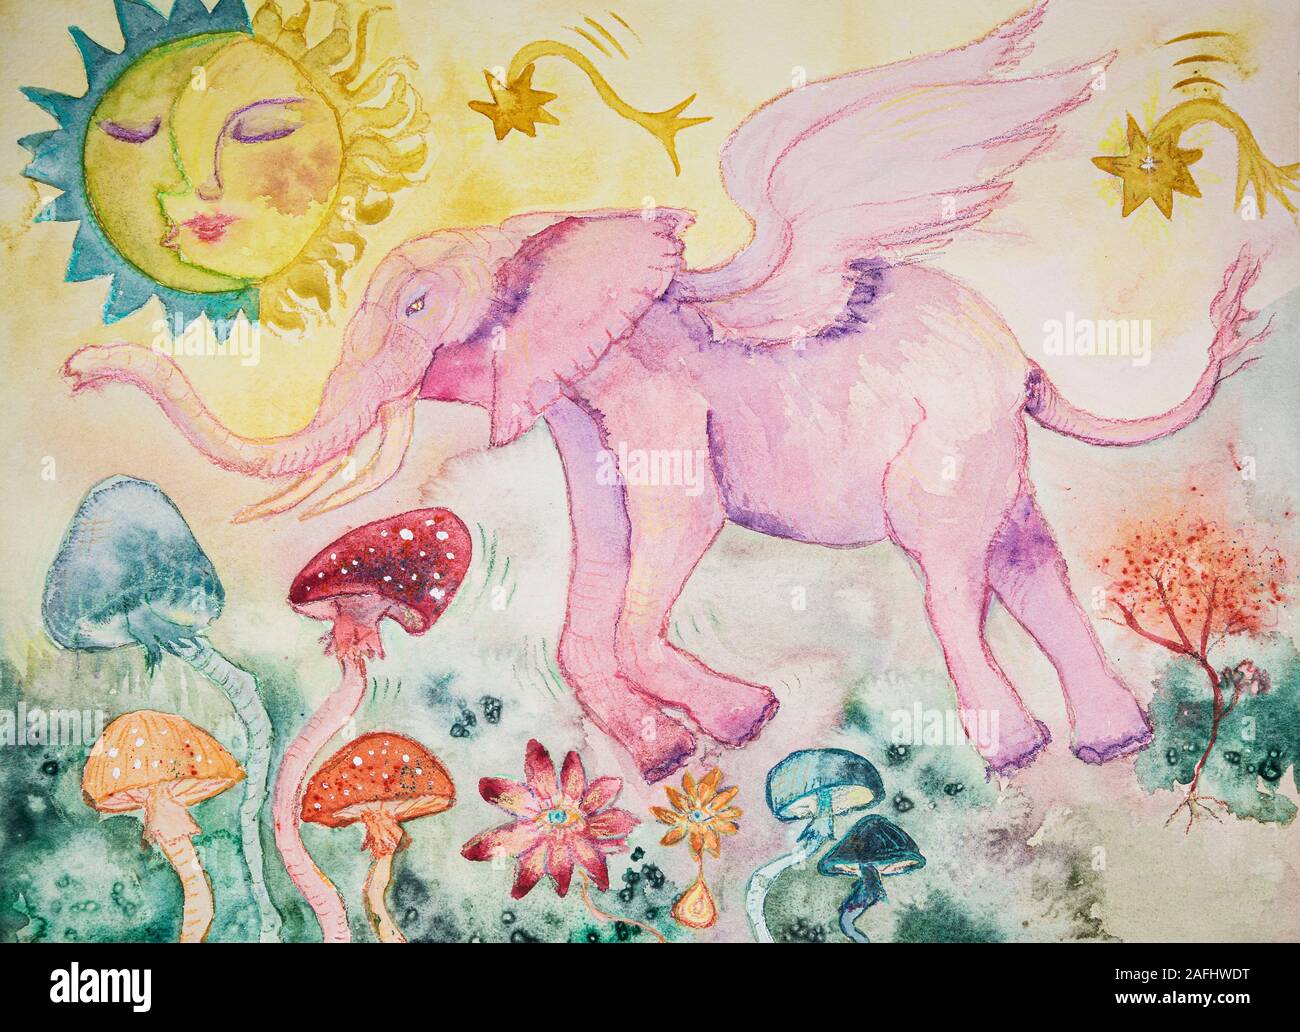 Psychedelic flying pink elephant. The dabbing technique near the edges gives a soft focus effect due to the altered surface roughness of the paper. Stock Photo